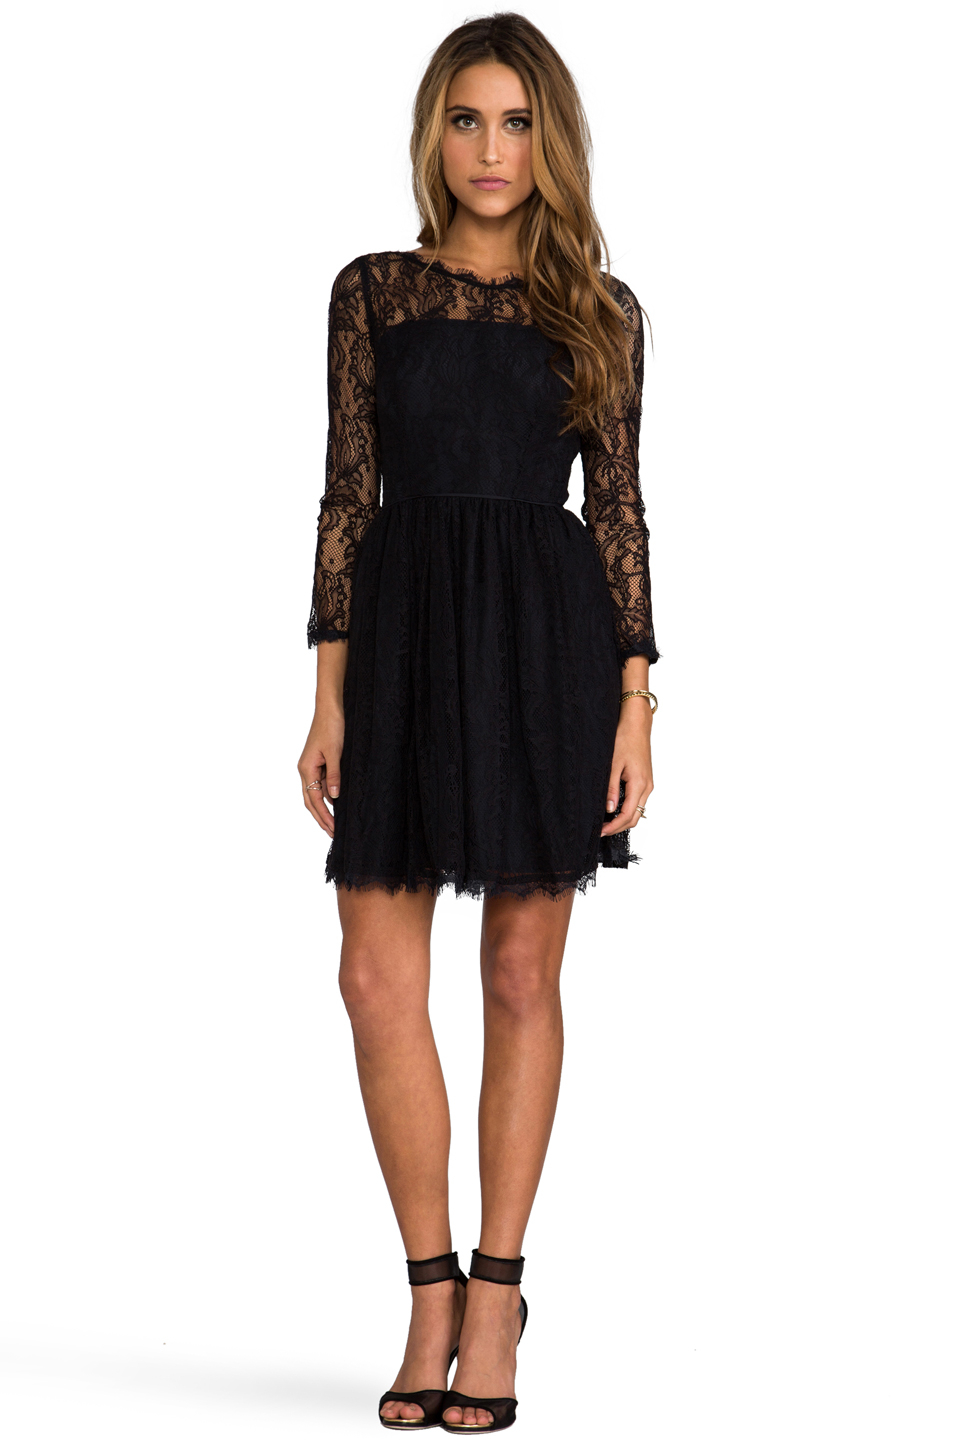 Lyst - Juicy couture Delicate Lace Dress in Black in Black